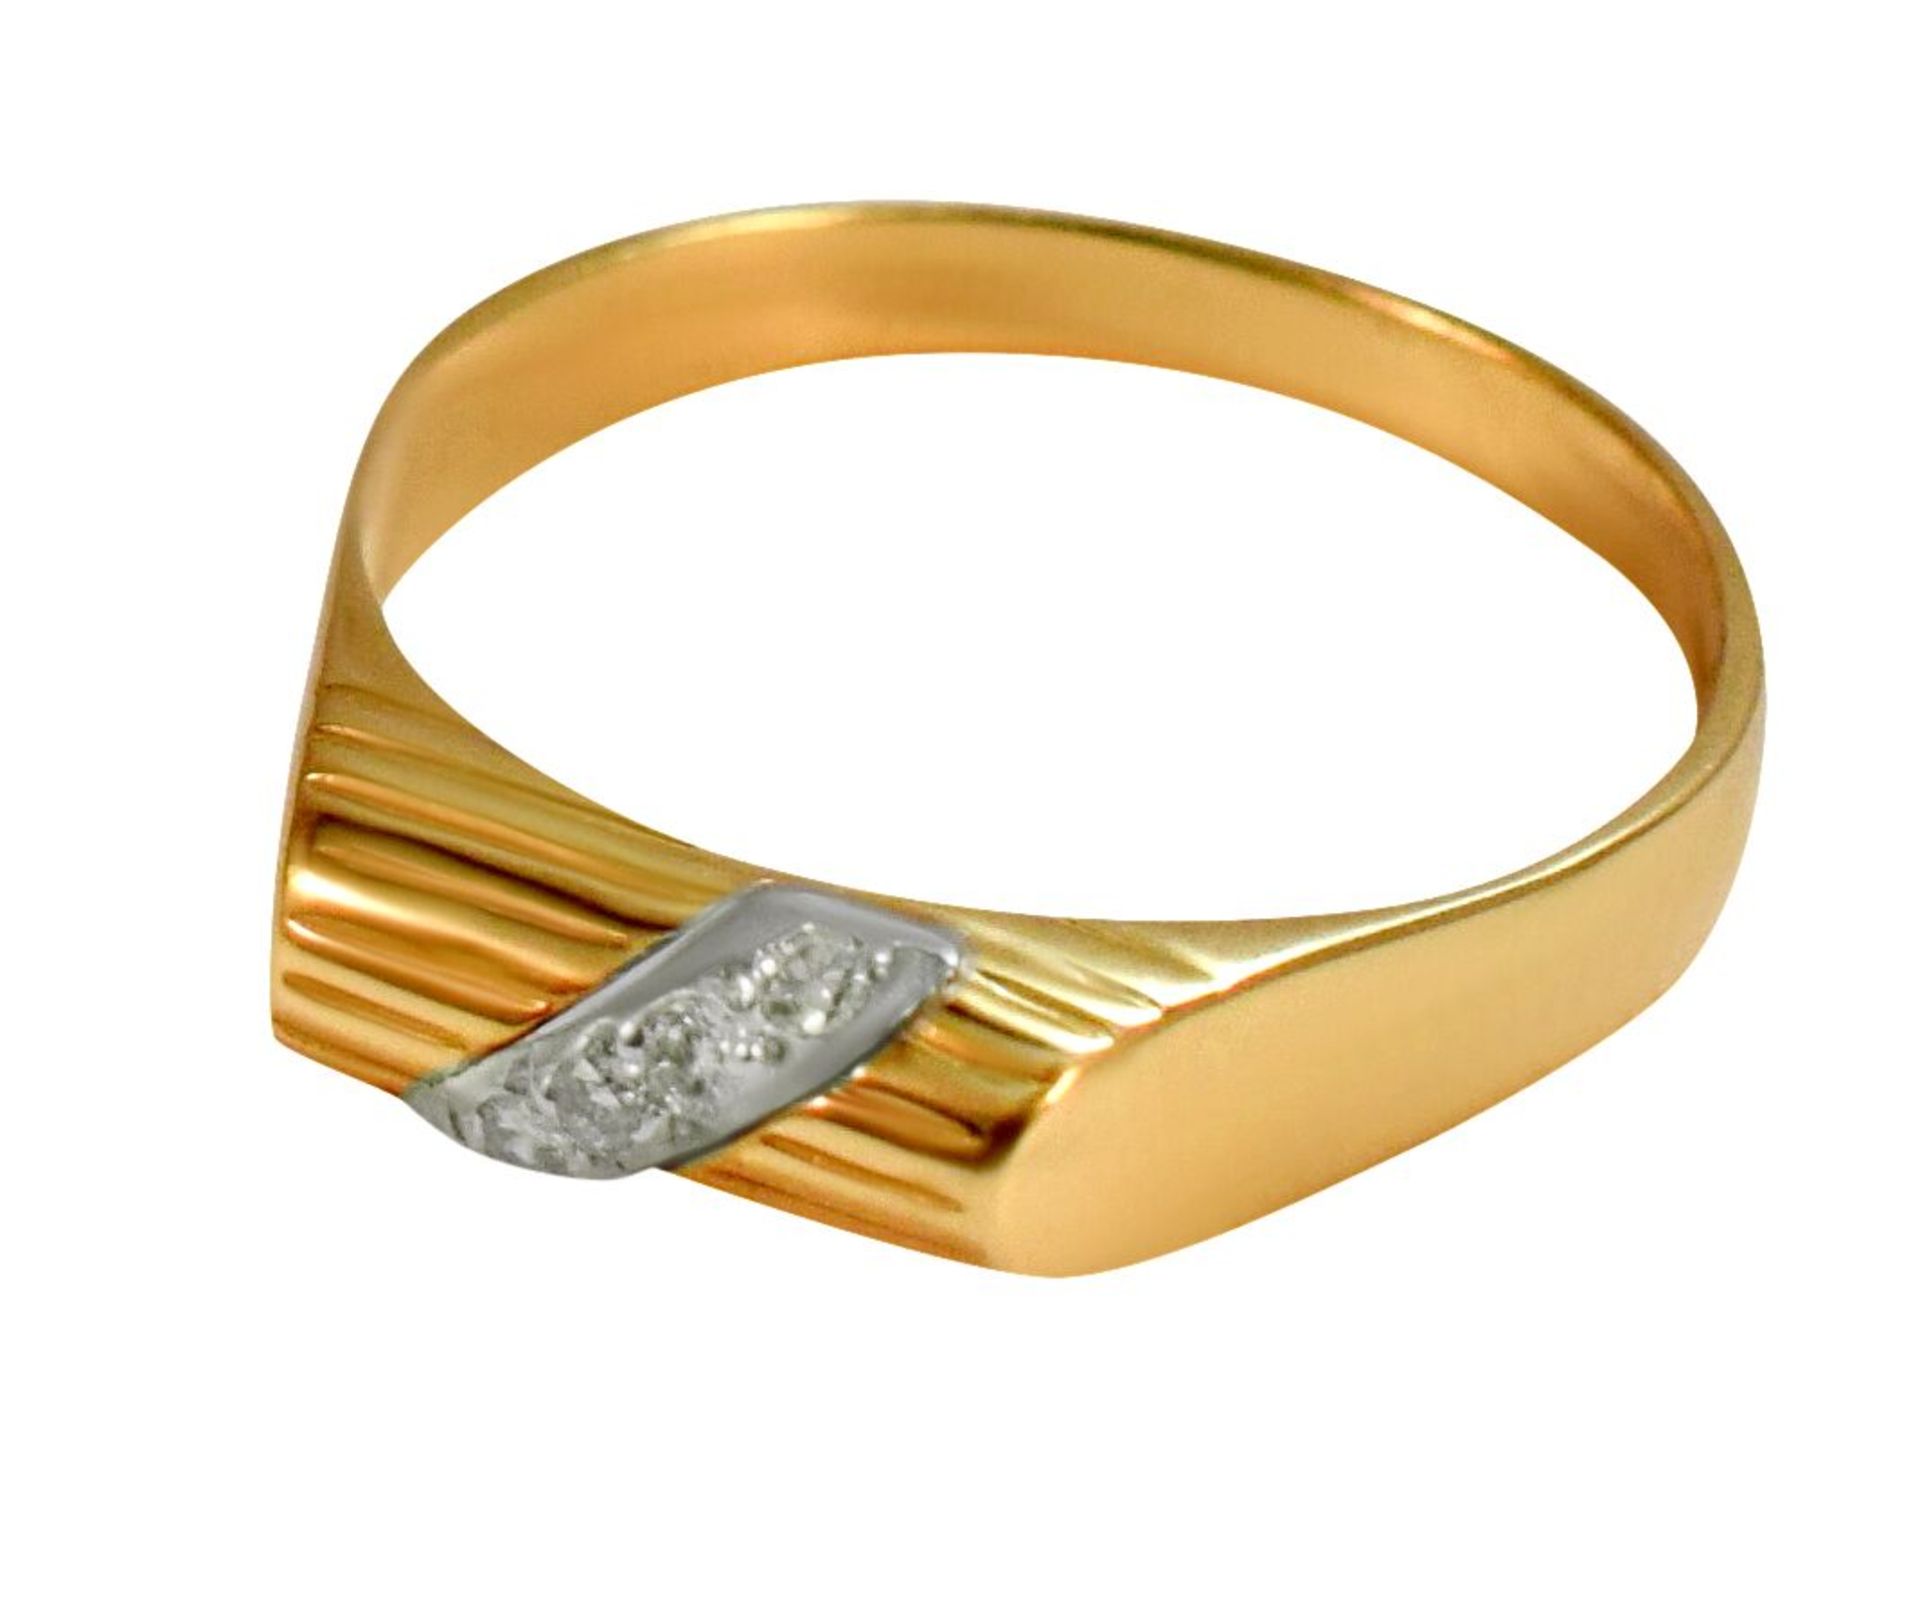 Diamond Ring, Metal 9ct Yellow Gold, Weight (g) 1.61, Diamond Weight (ct) 0.03, Colour H, Clarity - Image 3 of 4